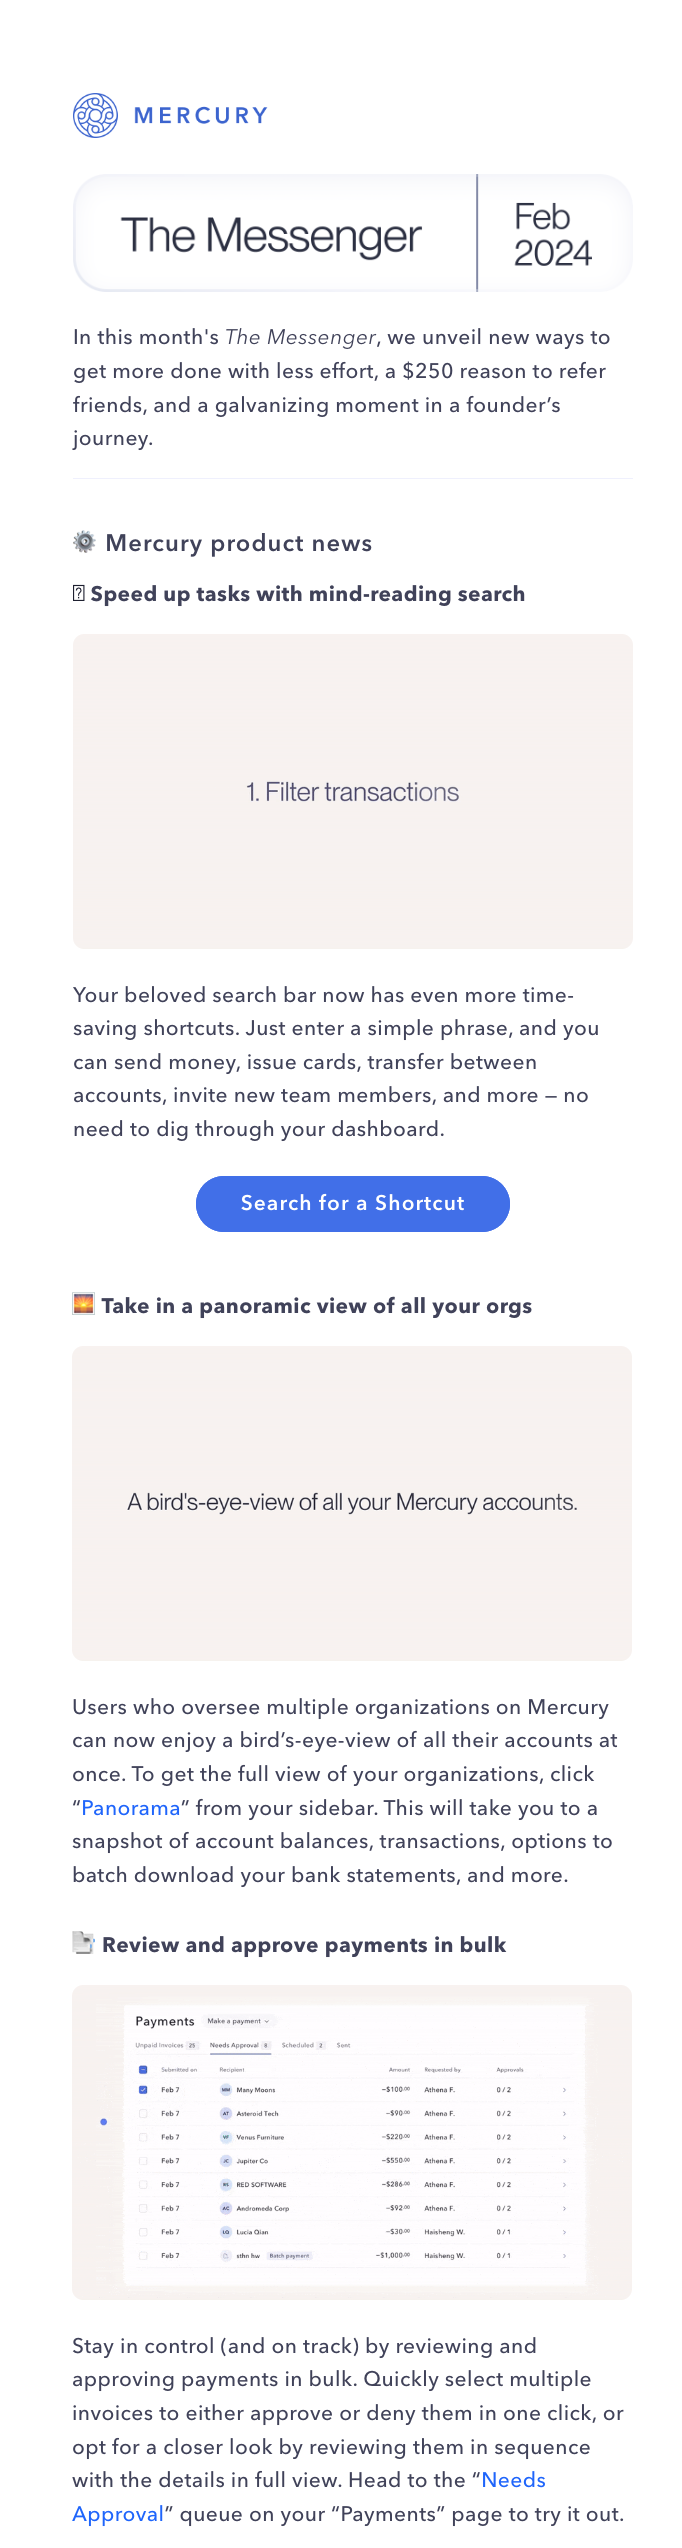 GIFs in SaaS Emails: Screenshot of Mercury's feature announcement email